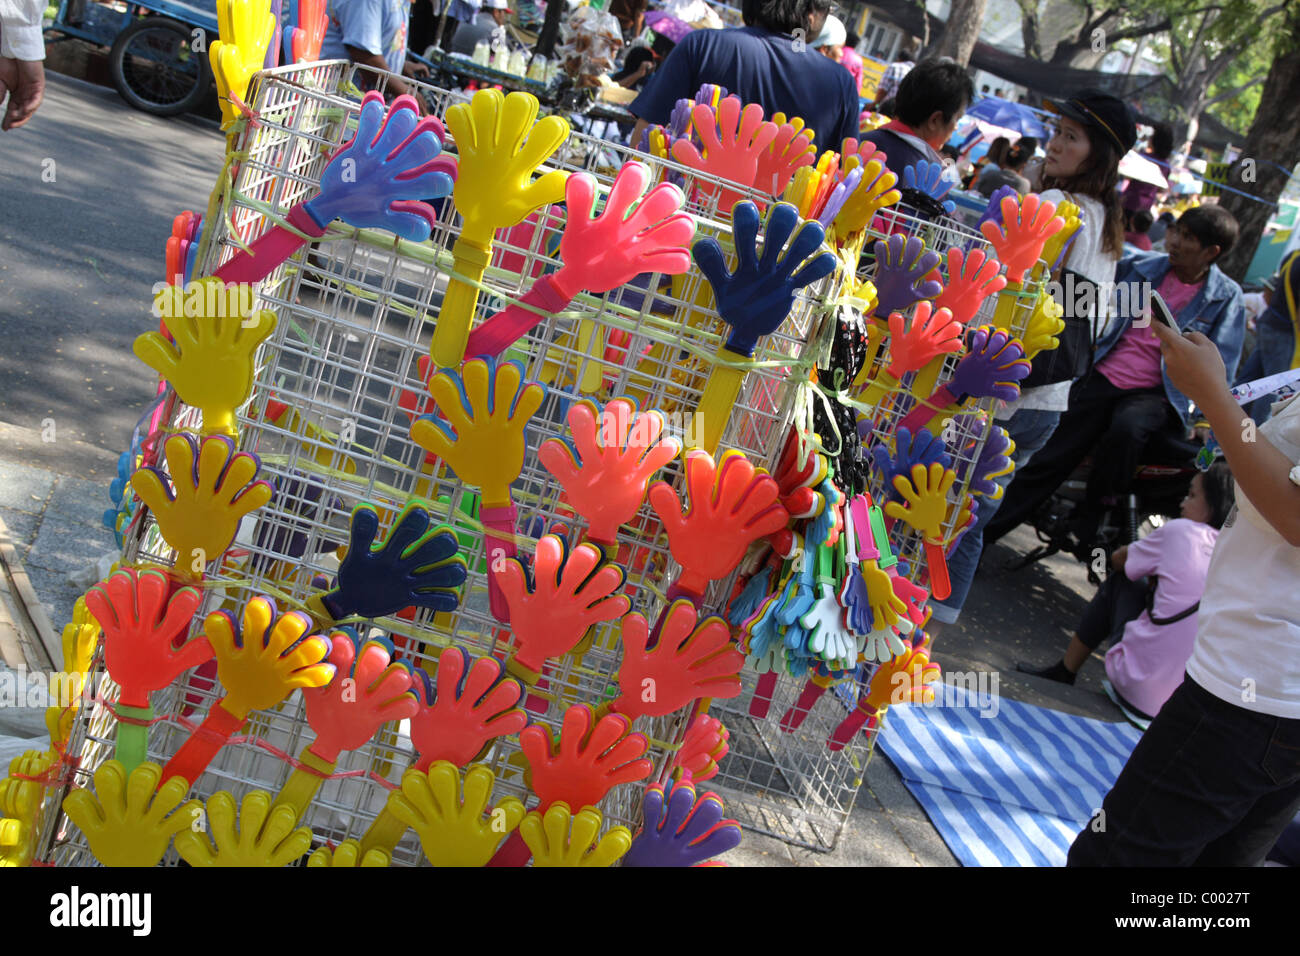 Hand-shaped clapper for sale in 'Yellow Shirts' PAD protester